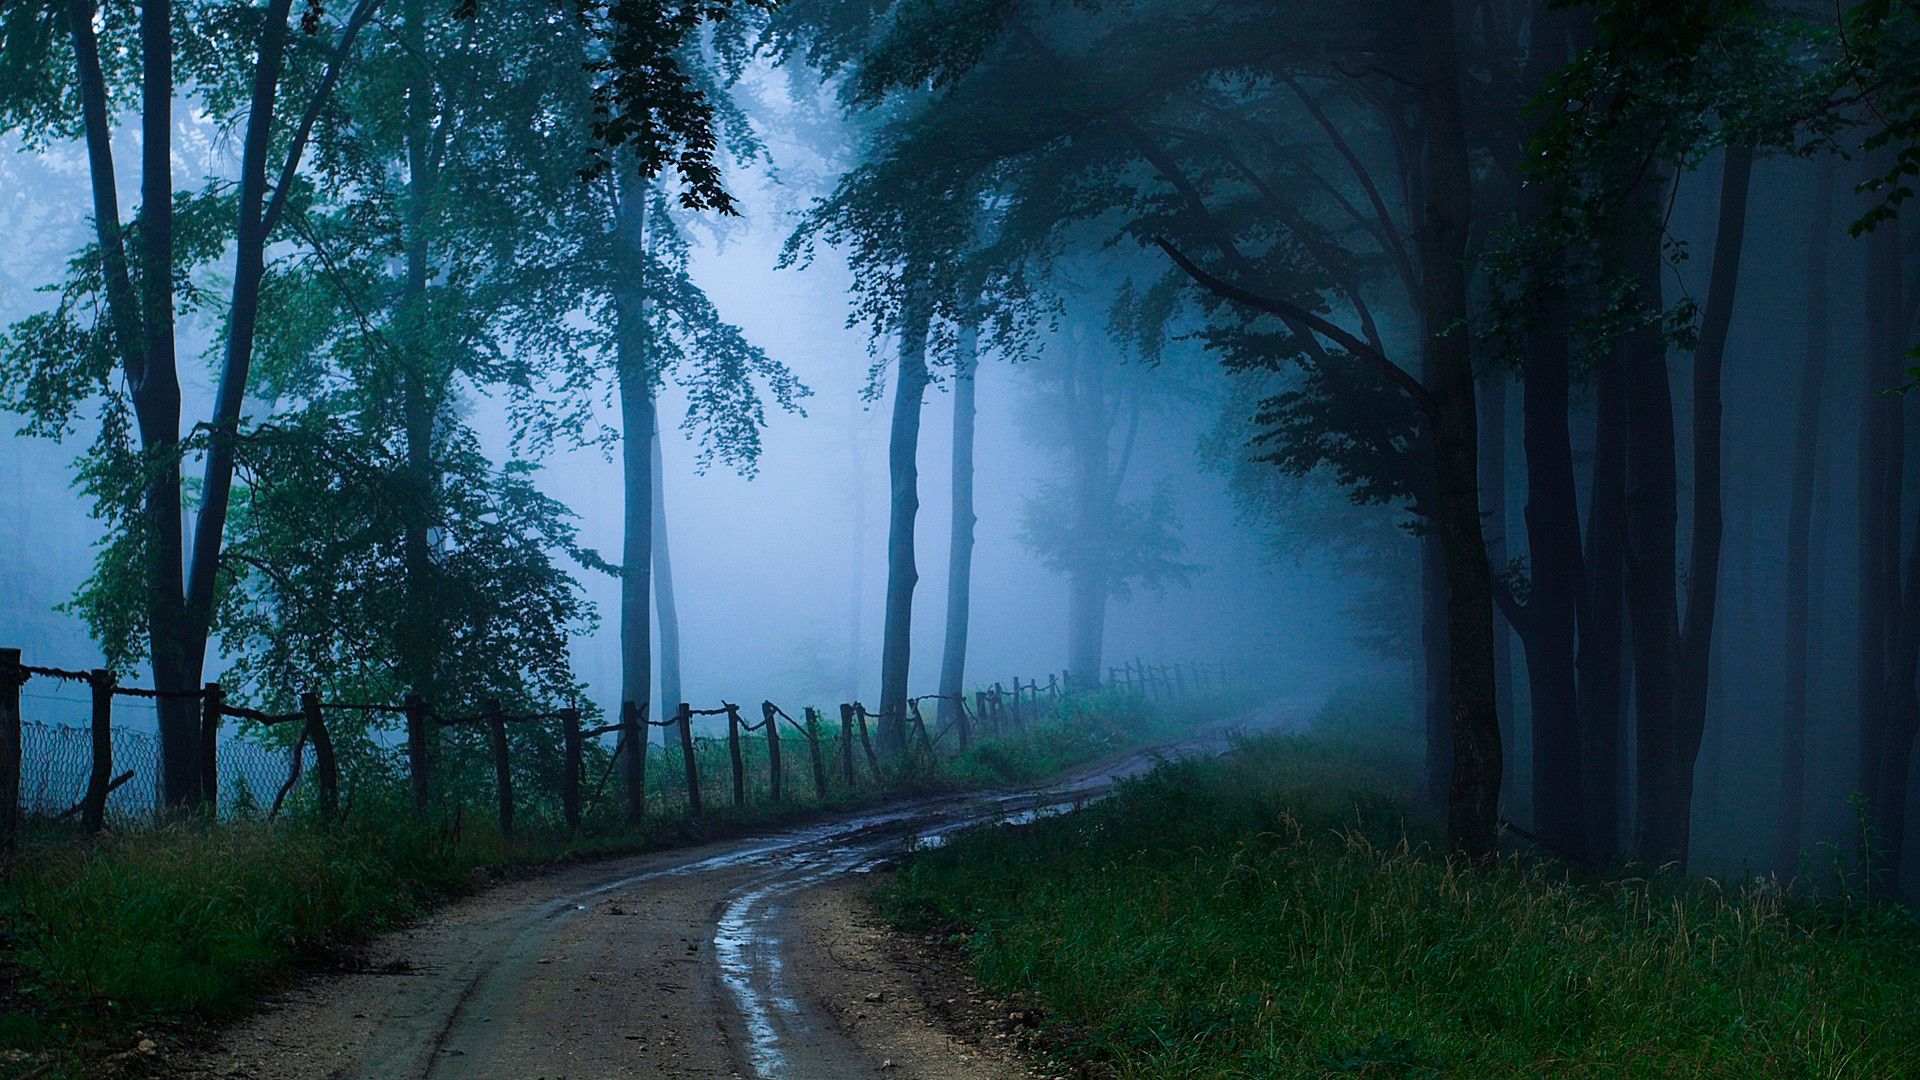 Country road in the dark forest. Widescreen wallpaper beautiful scenery for your phone